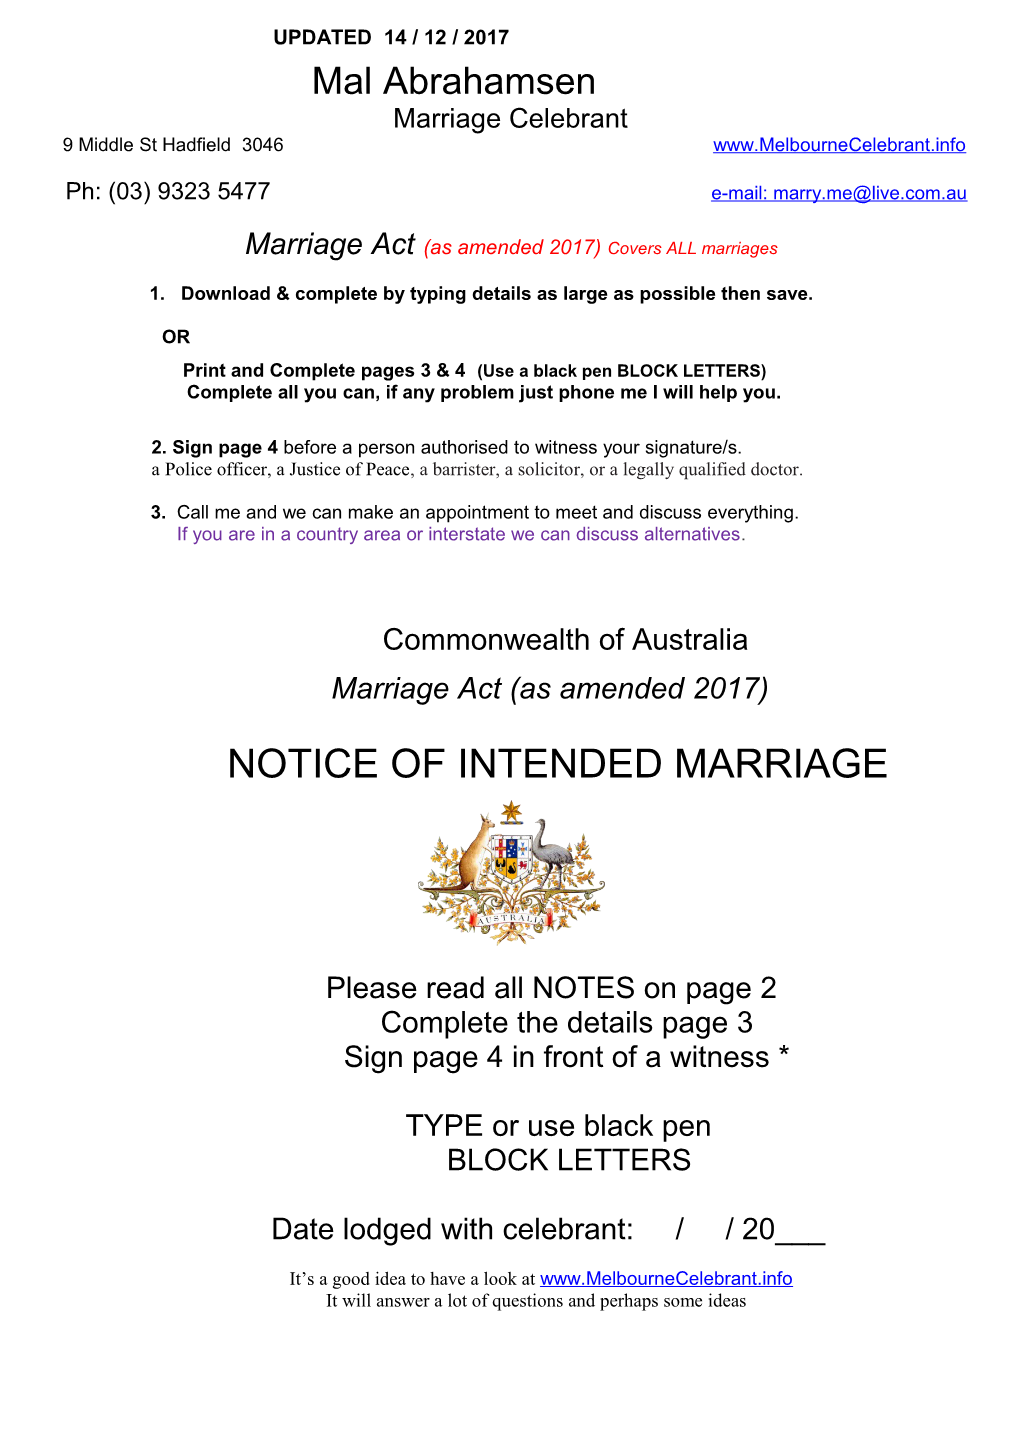 Notice of Intended Marriage